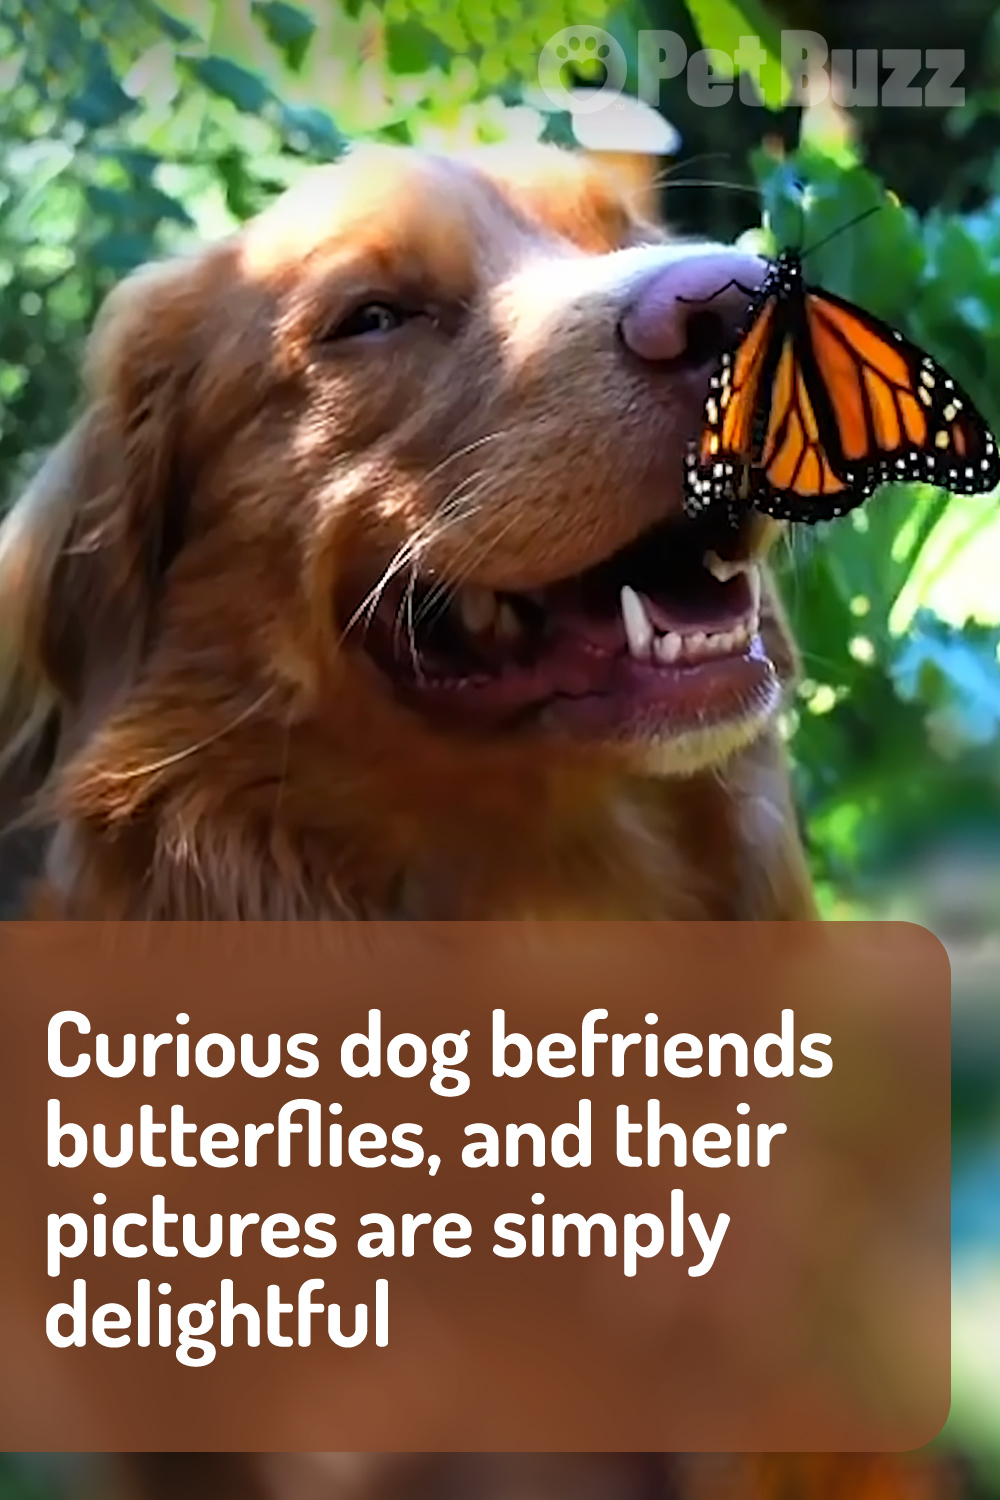 Curious dog befriends butterflies, and their pictures are simply delightful